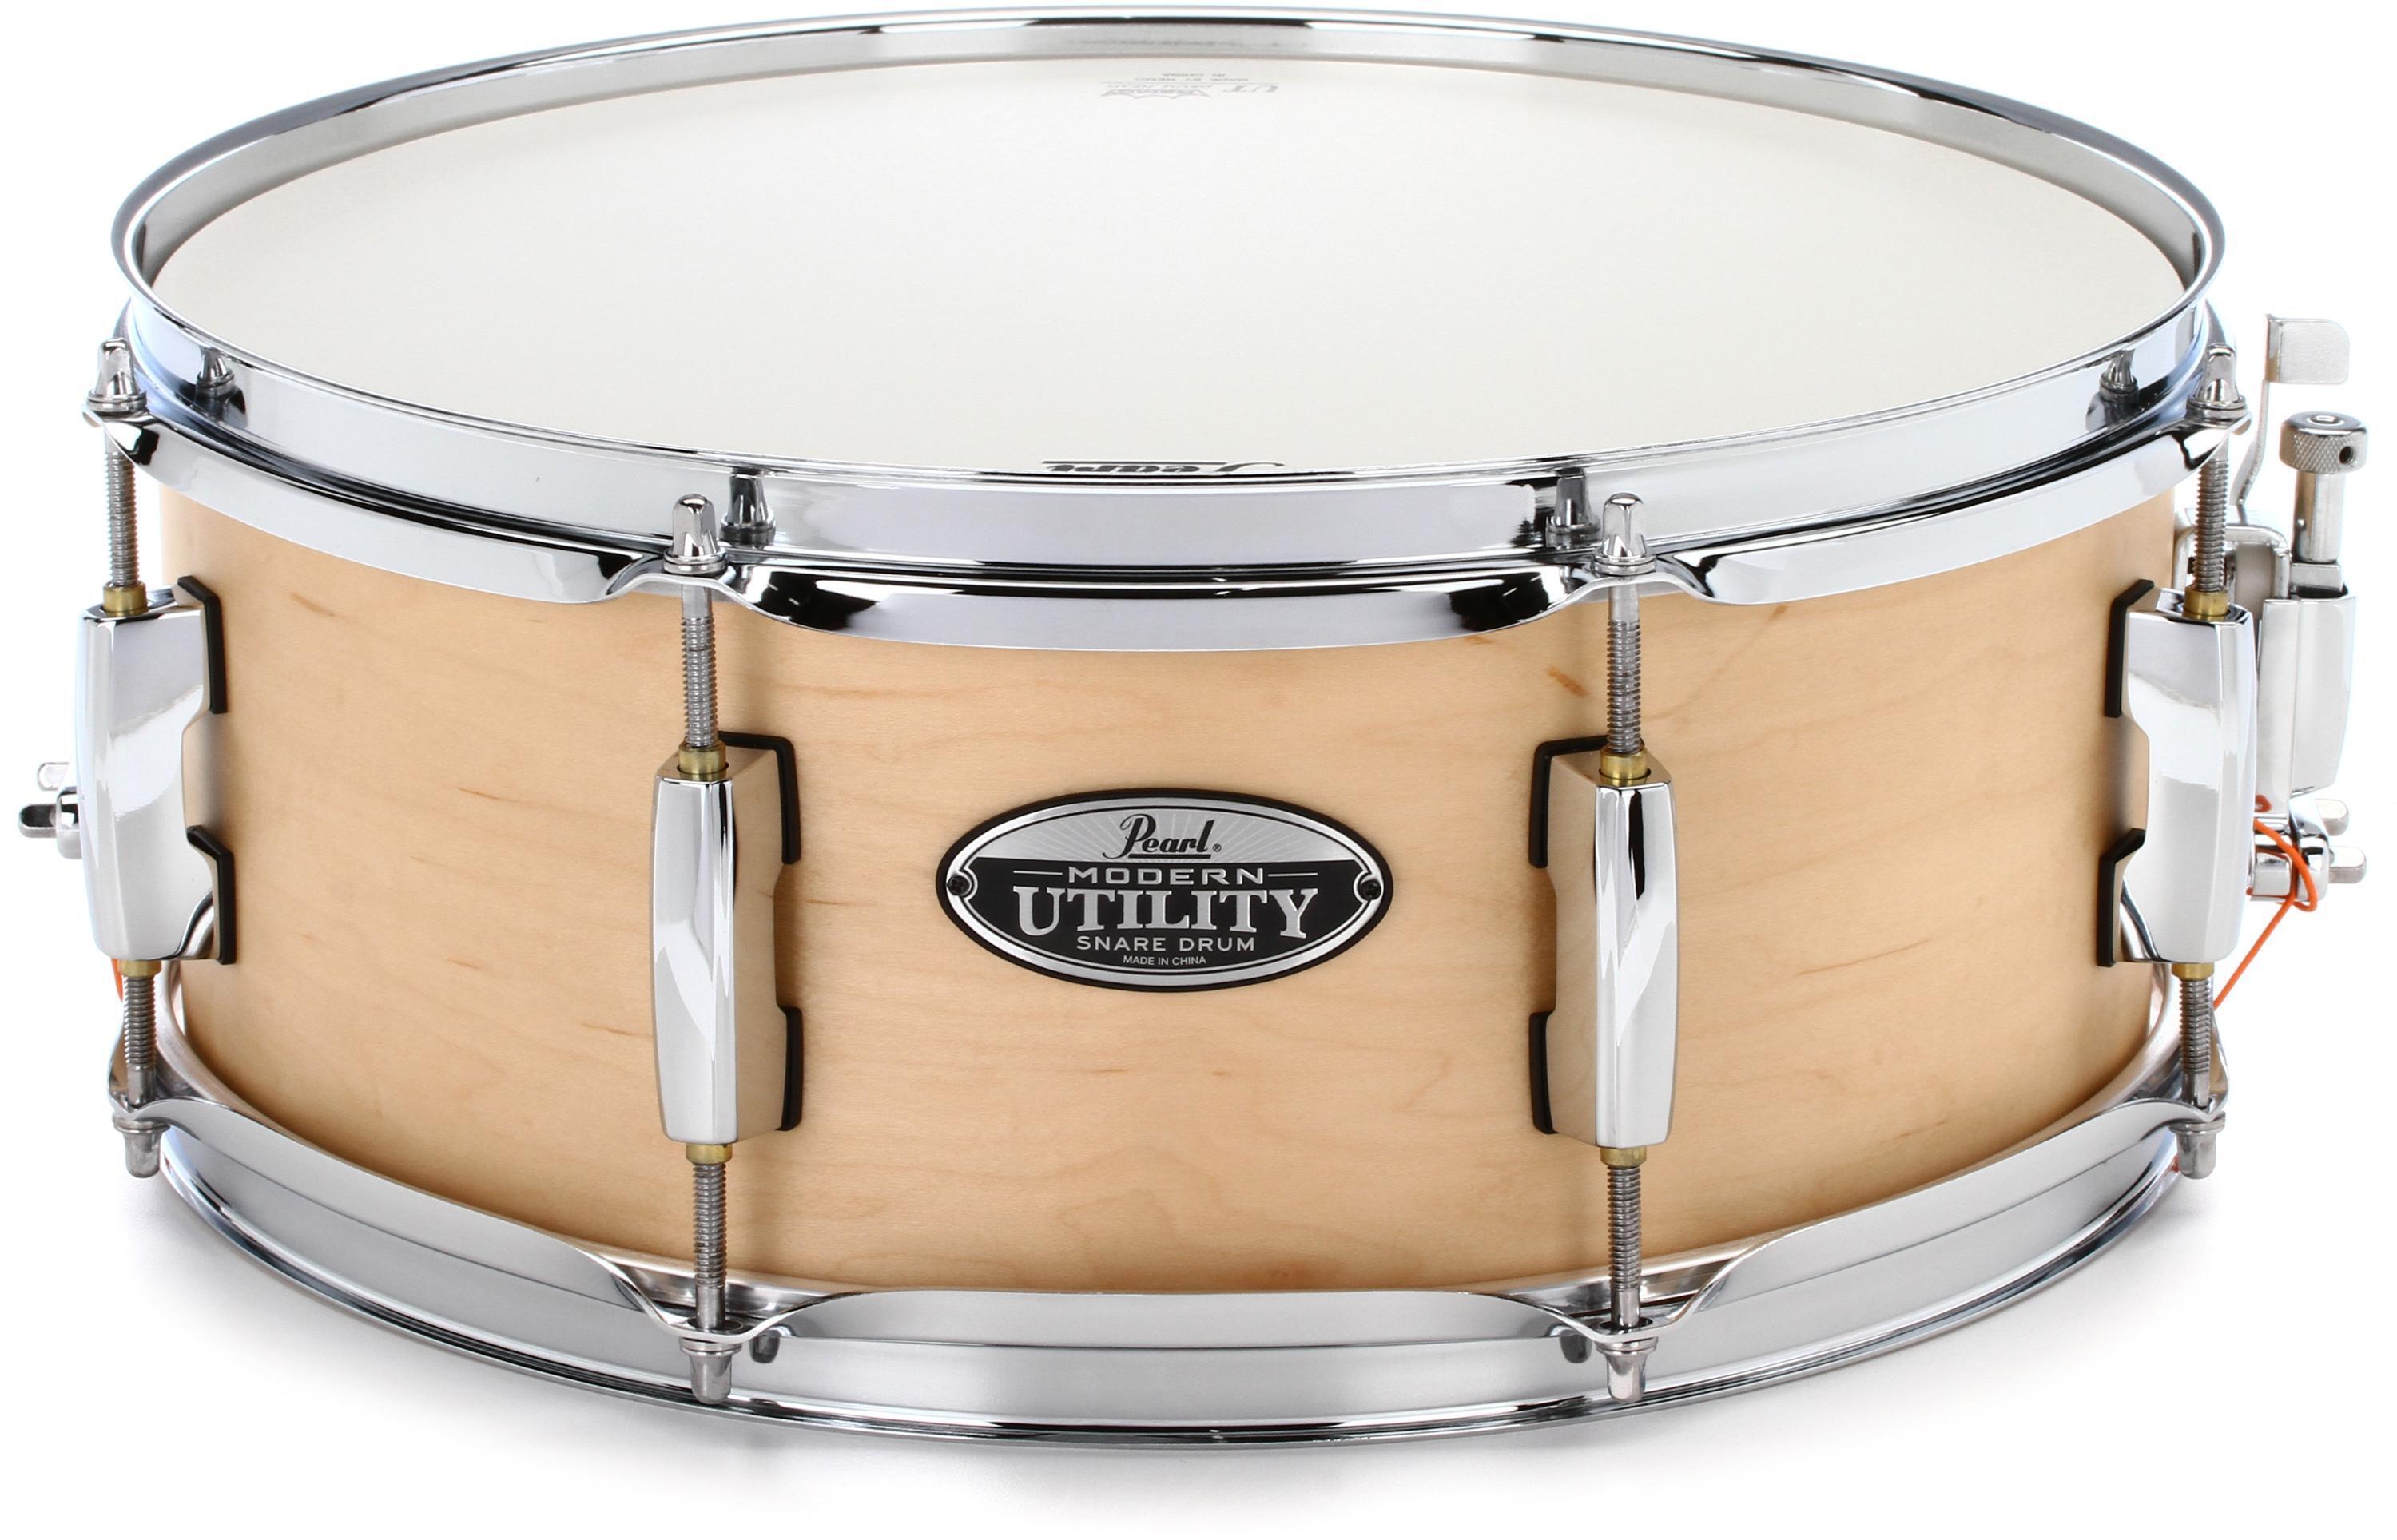 Pearl Modern Utility Snare Drum - 14 x 5.5 inch - Satin Natural